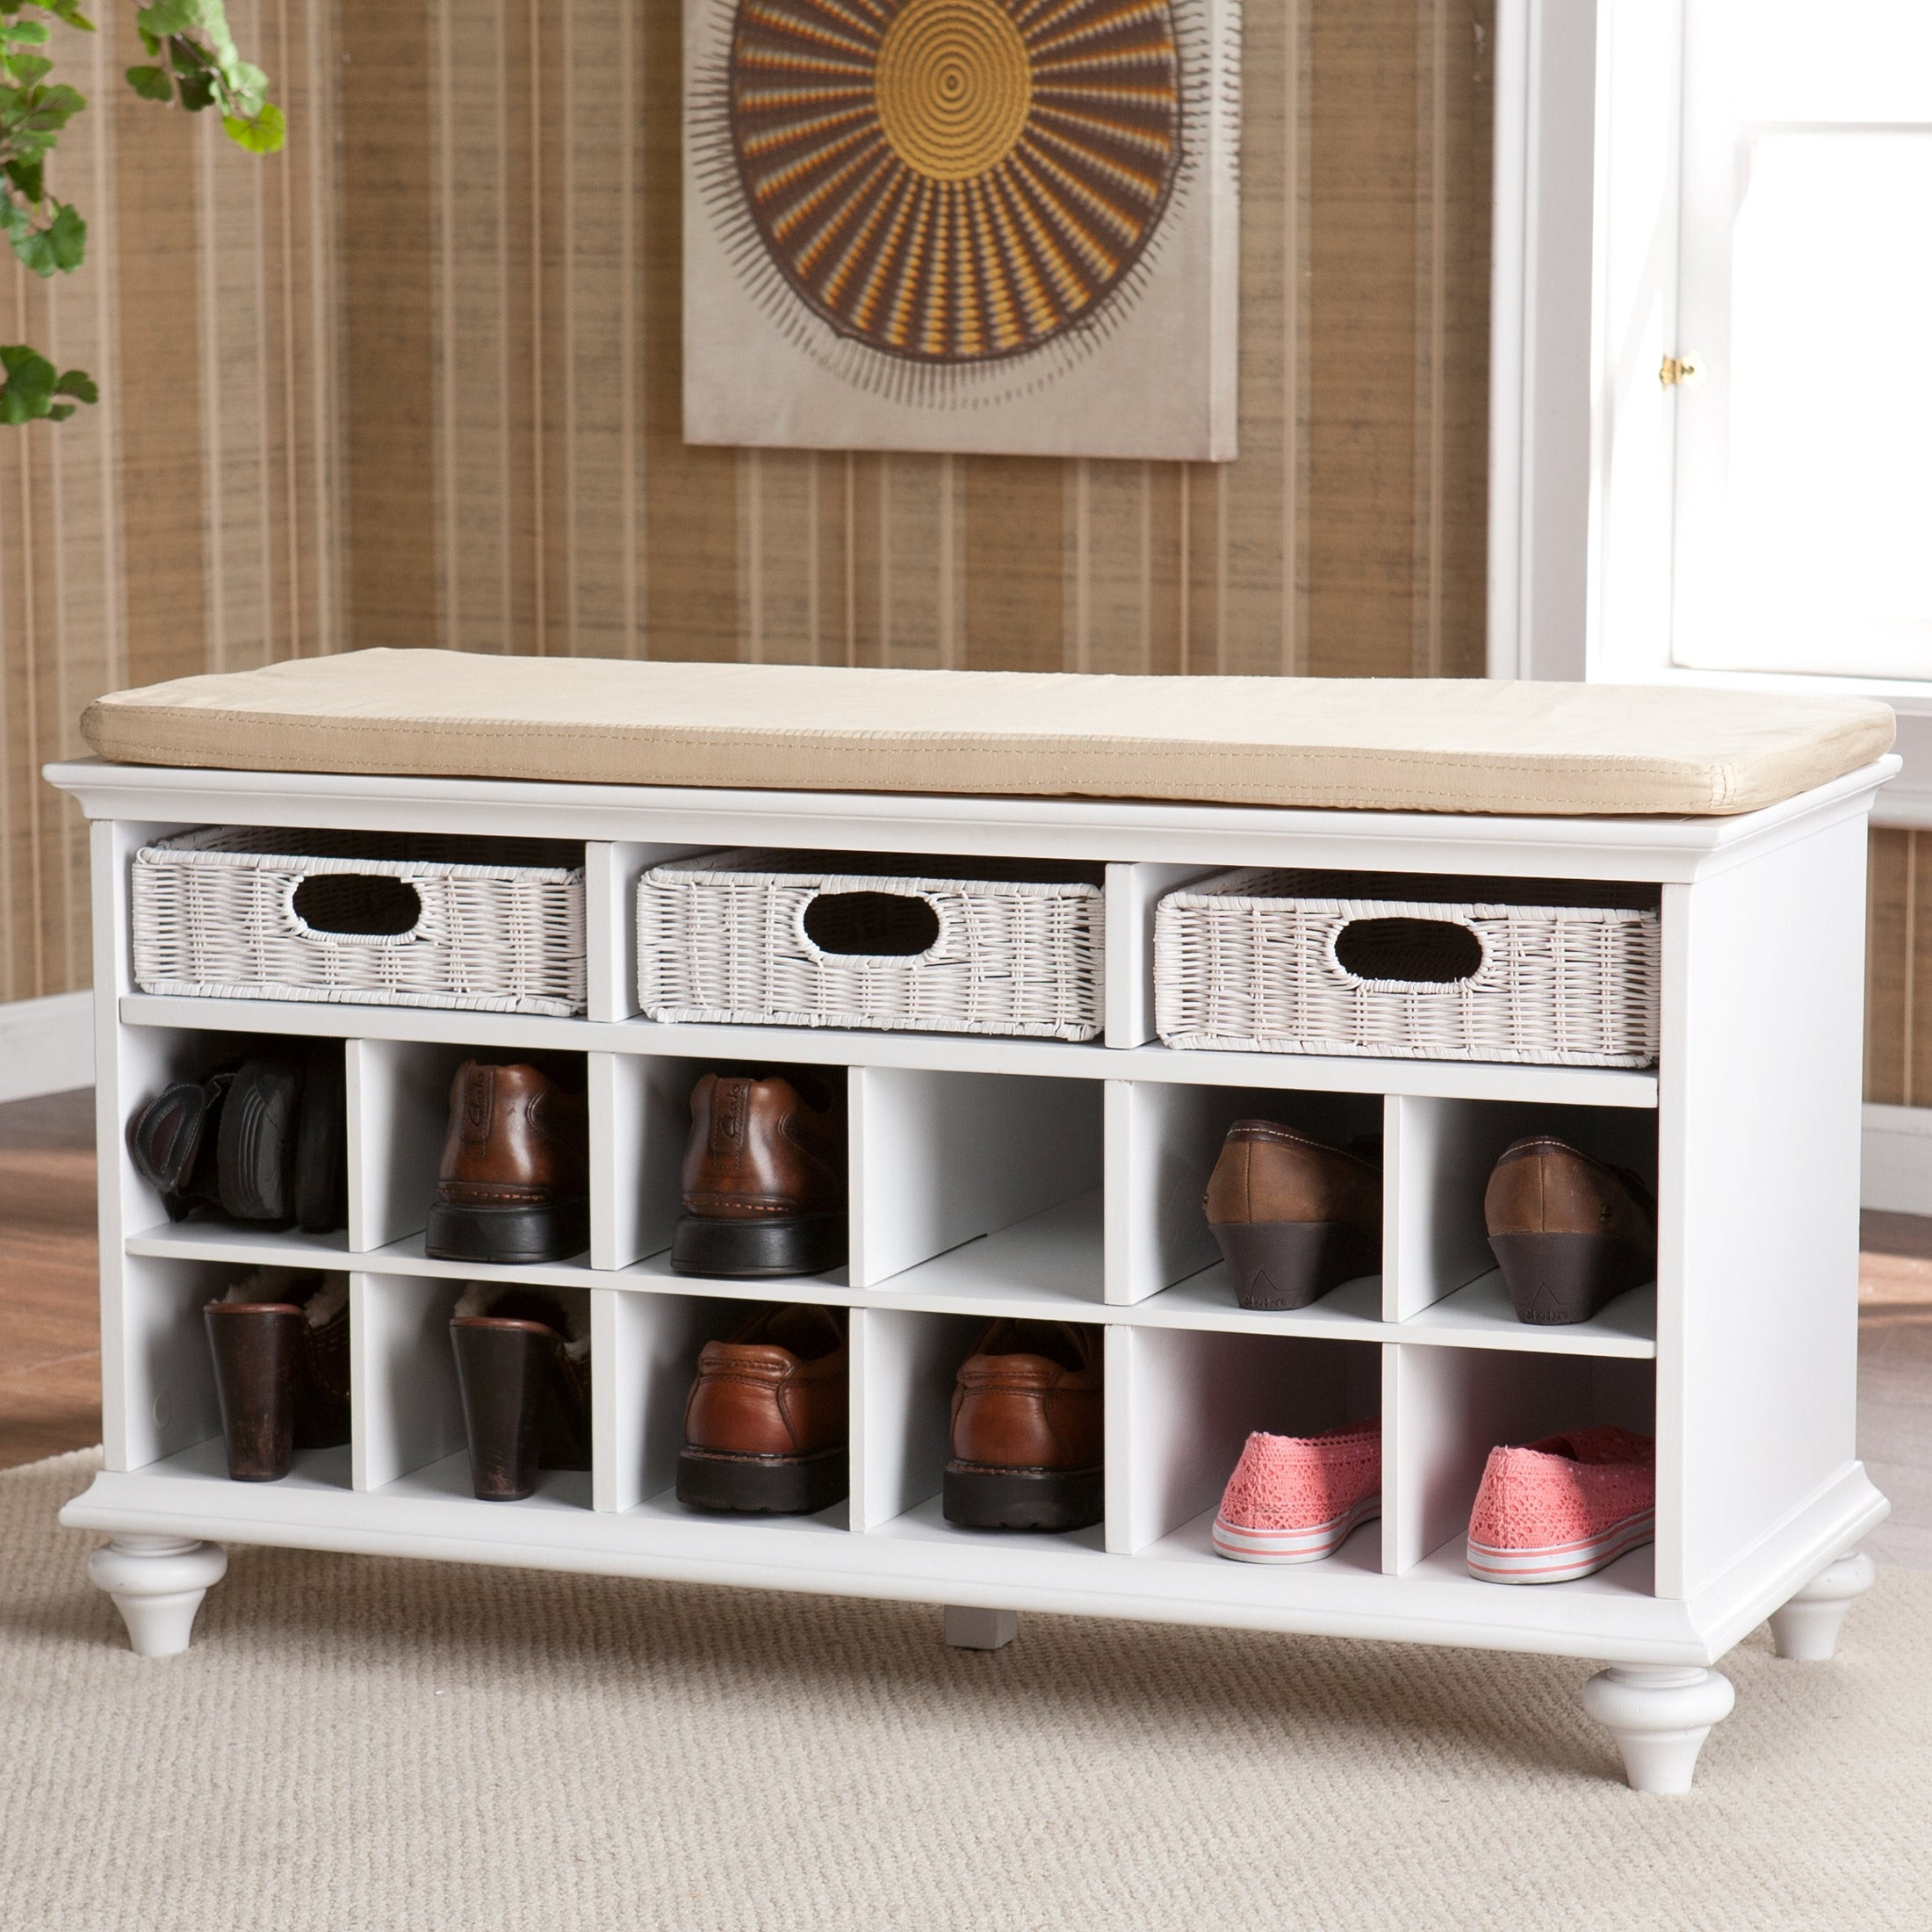 Entry Benches Shoe Storage
 Shop Harper Blvd Kelly White Entryway Bench with Shoe